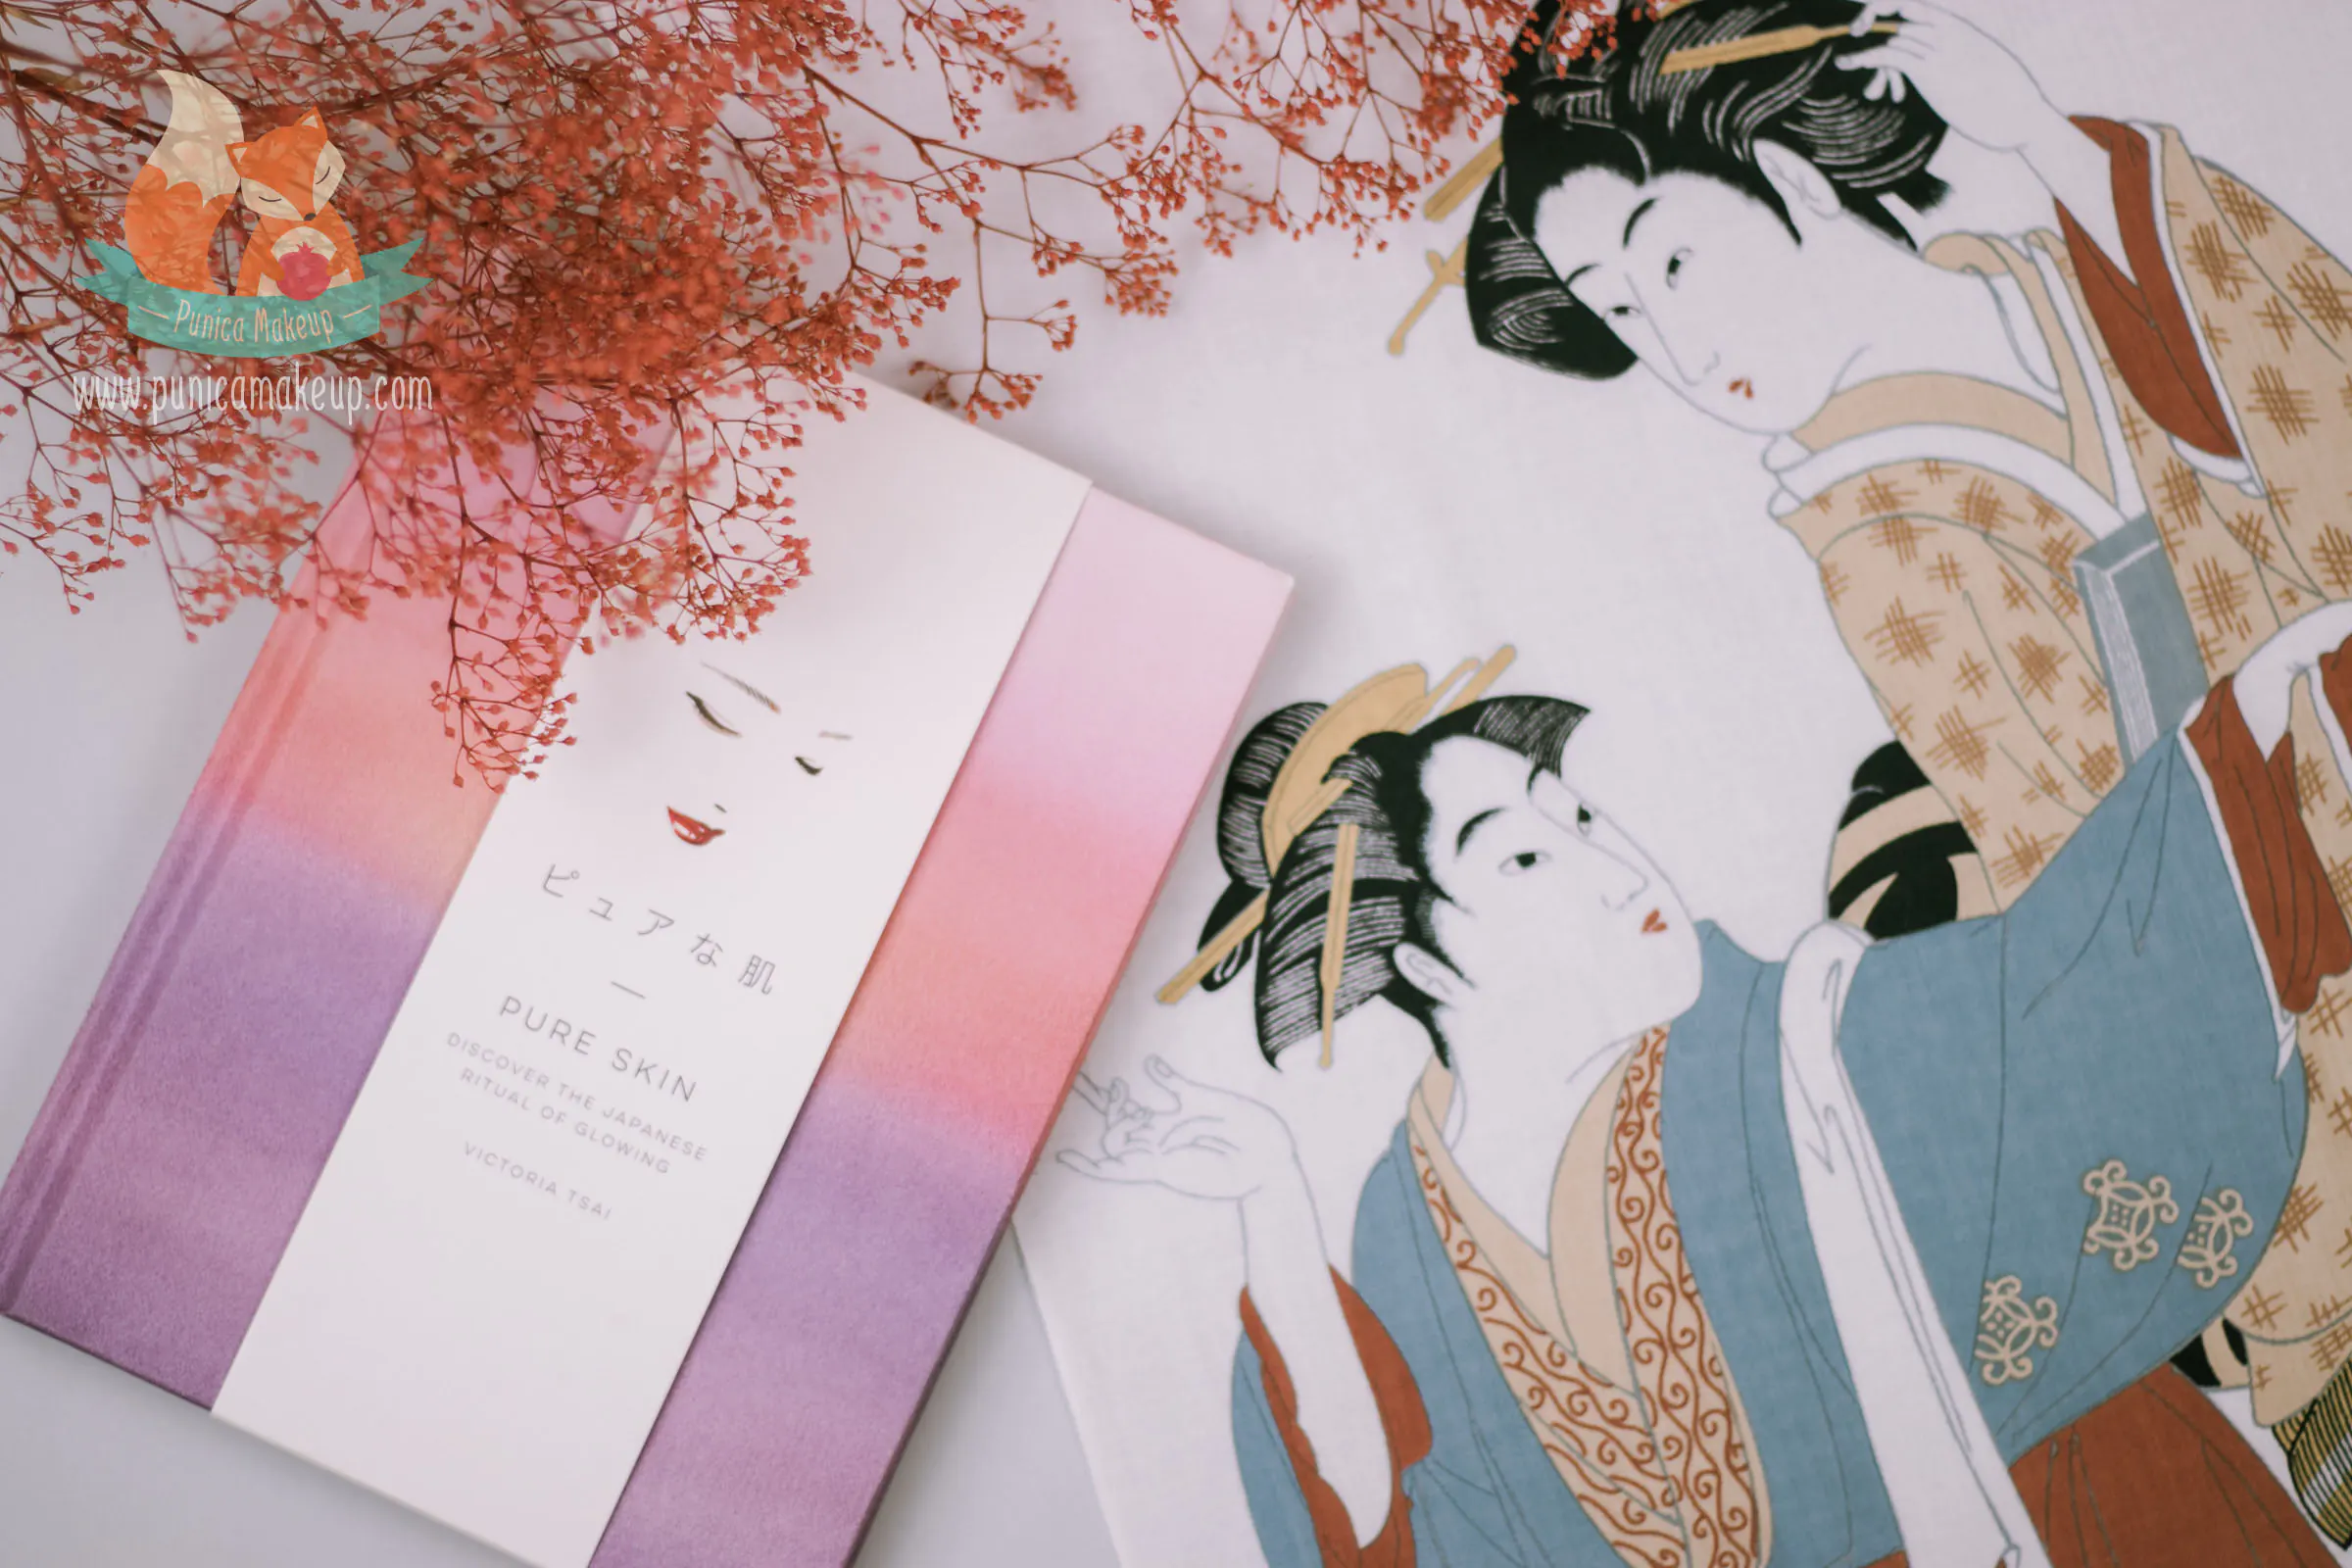 Pure Skin: Discover the Japanese Ritual of Glowing by Victoria Tsai